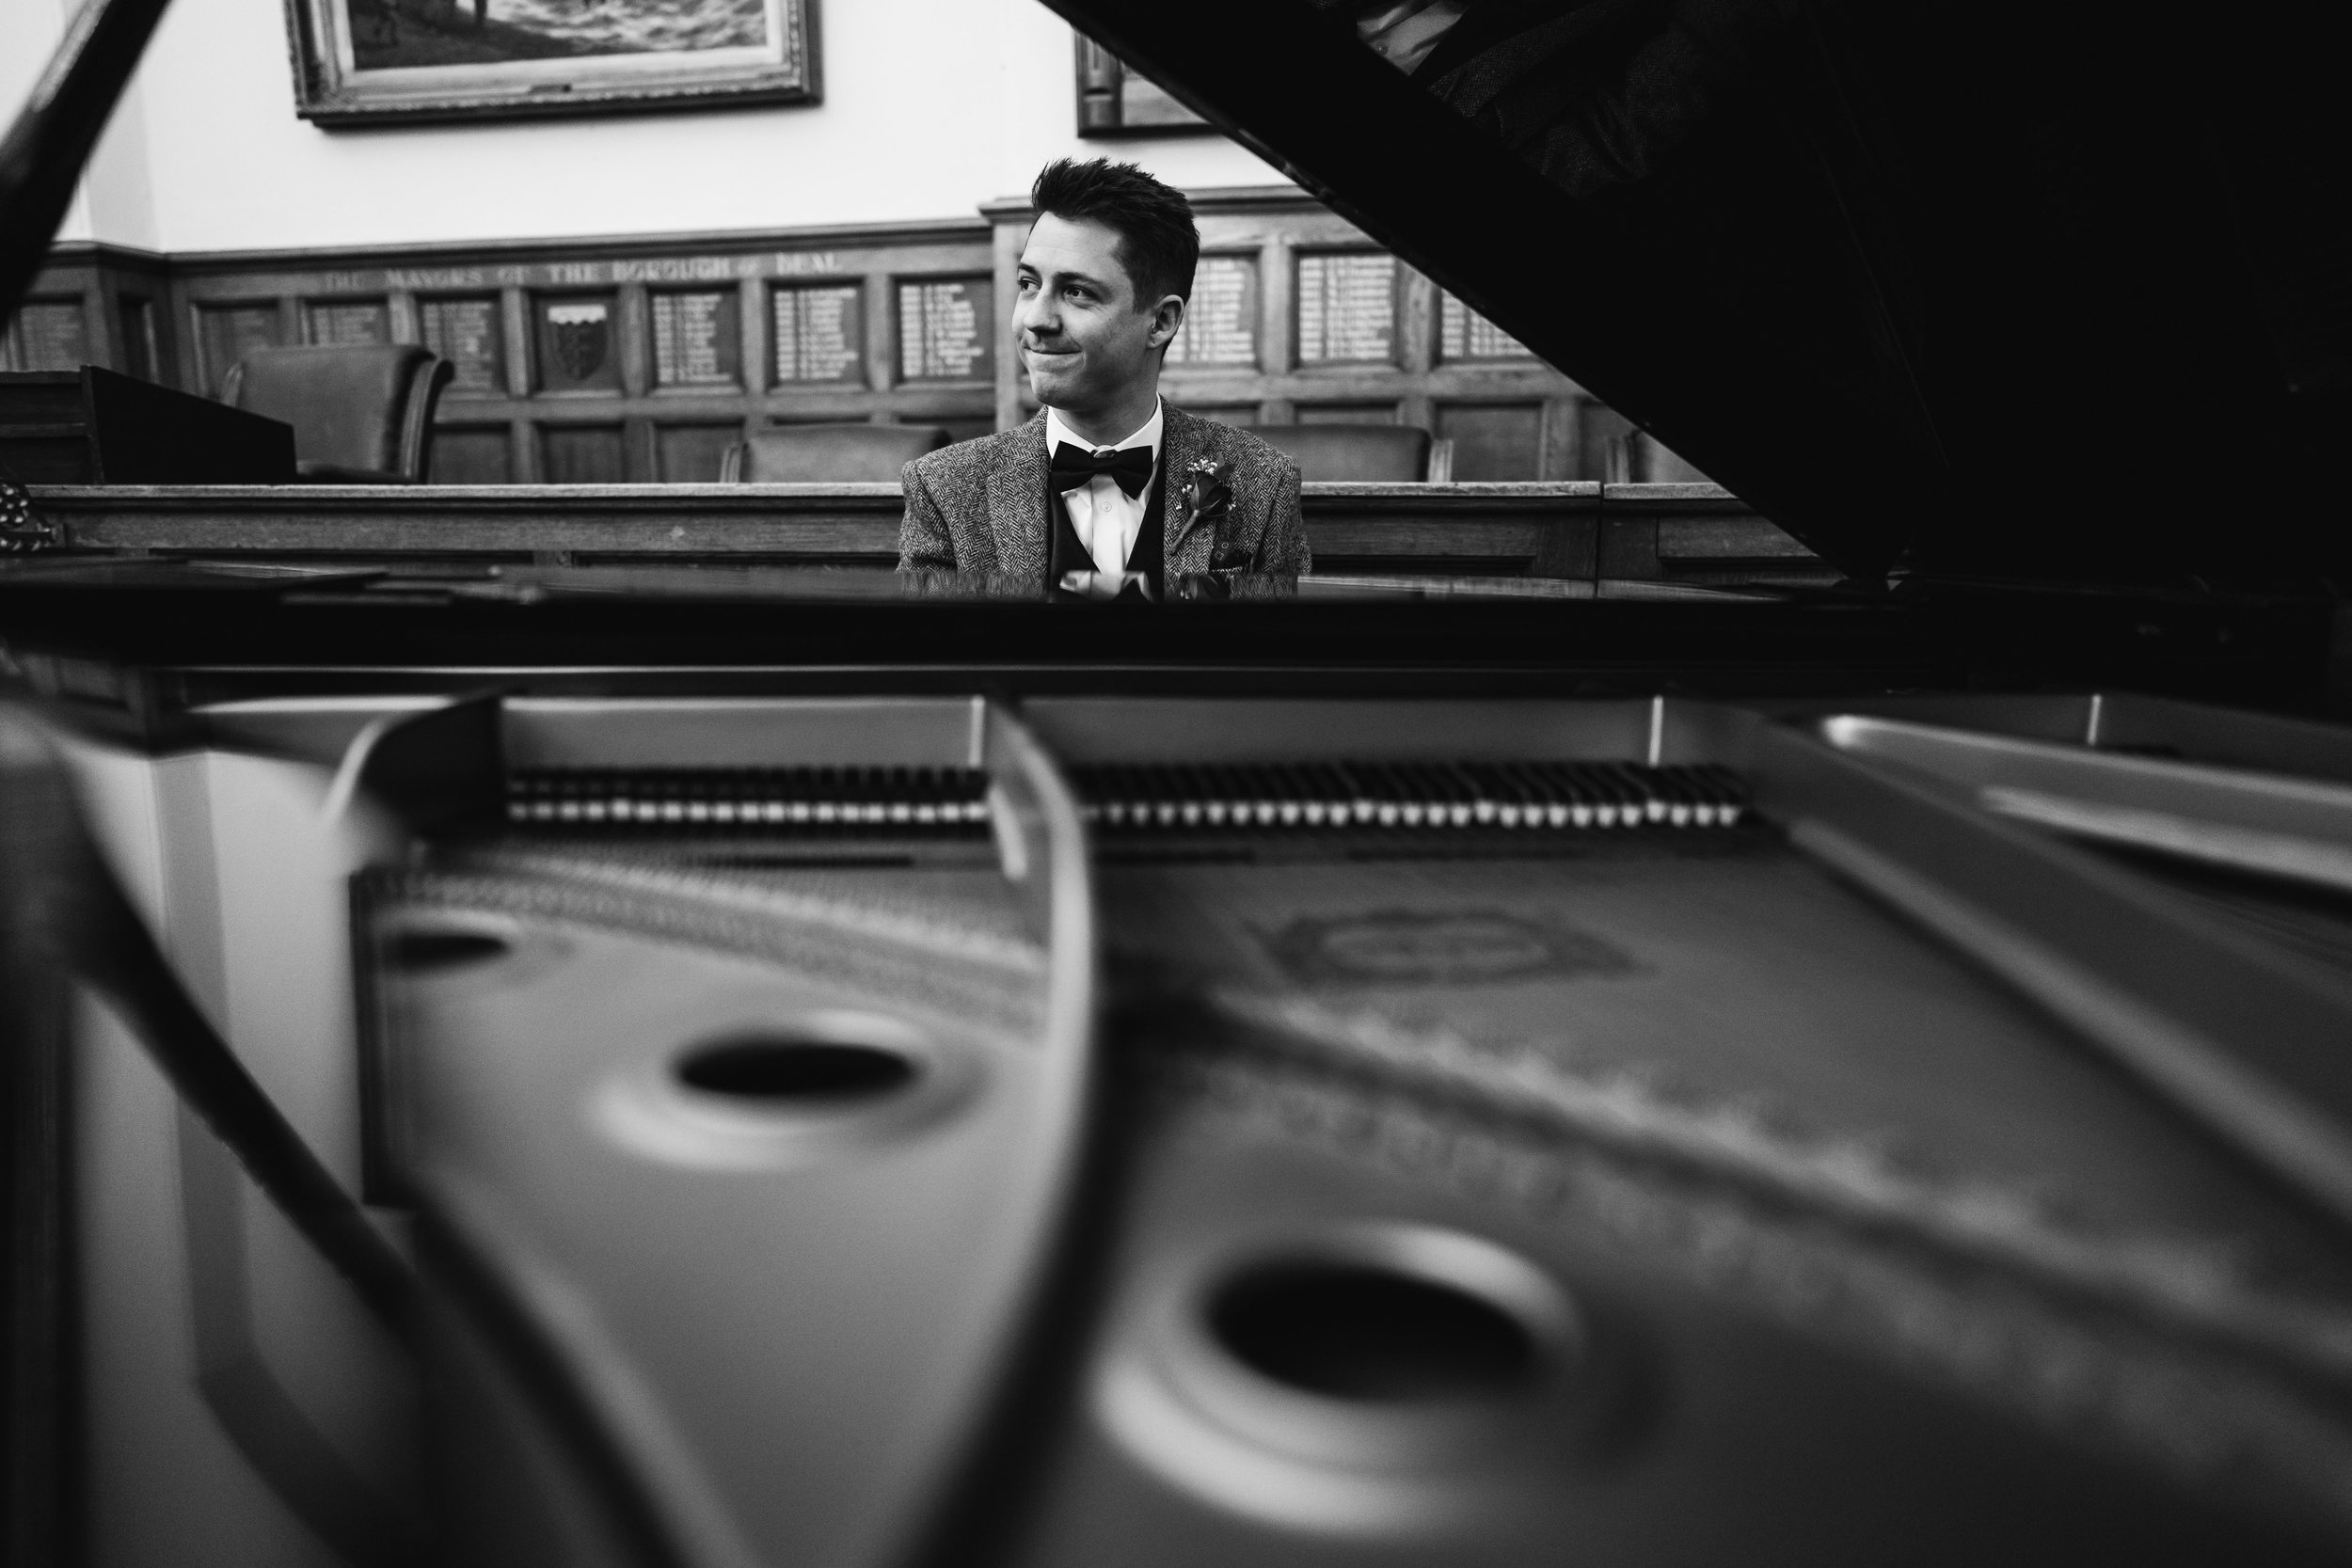 The groom on the piano